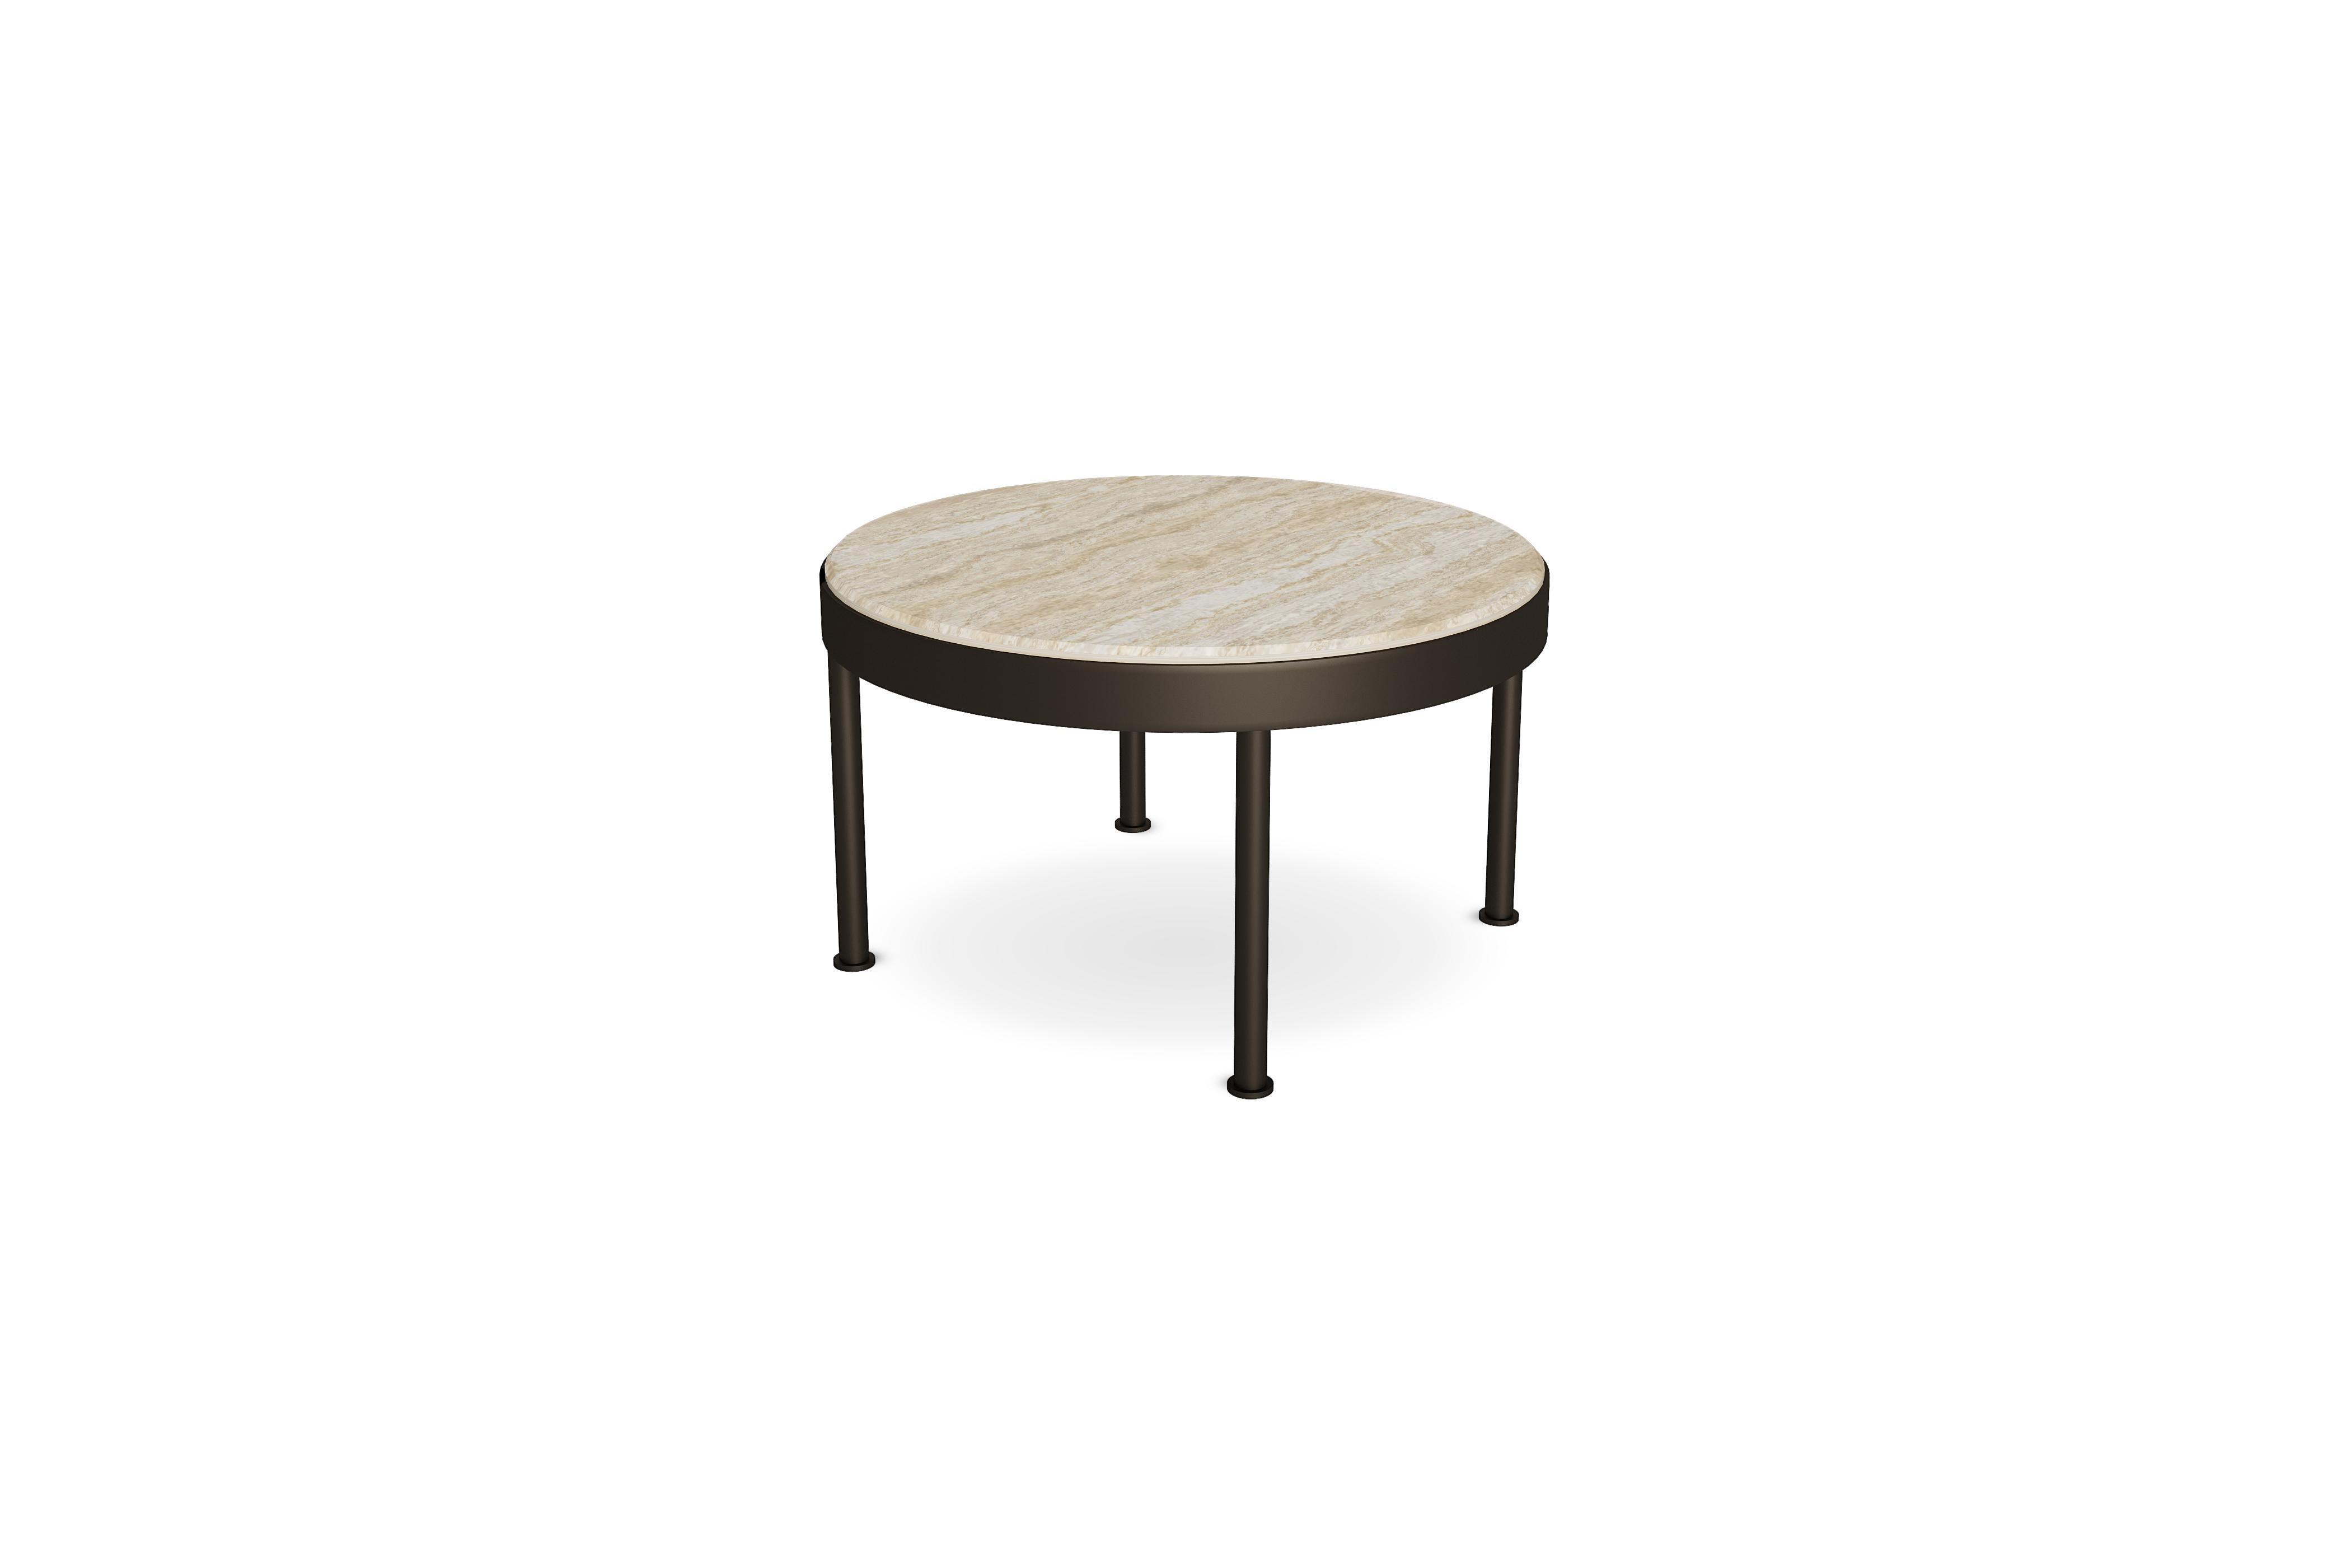 Trace outdoor center table big 

The Trace outdoor center table is the perfect furniture piece to complement any outdoor lounge space and concede it a modern and sophisticated touch. It goes beautifully with the remaining pieces of the